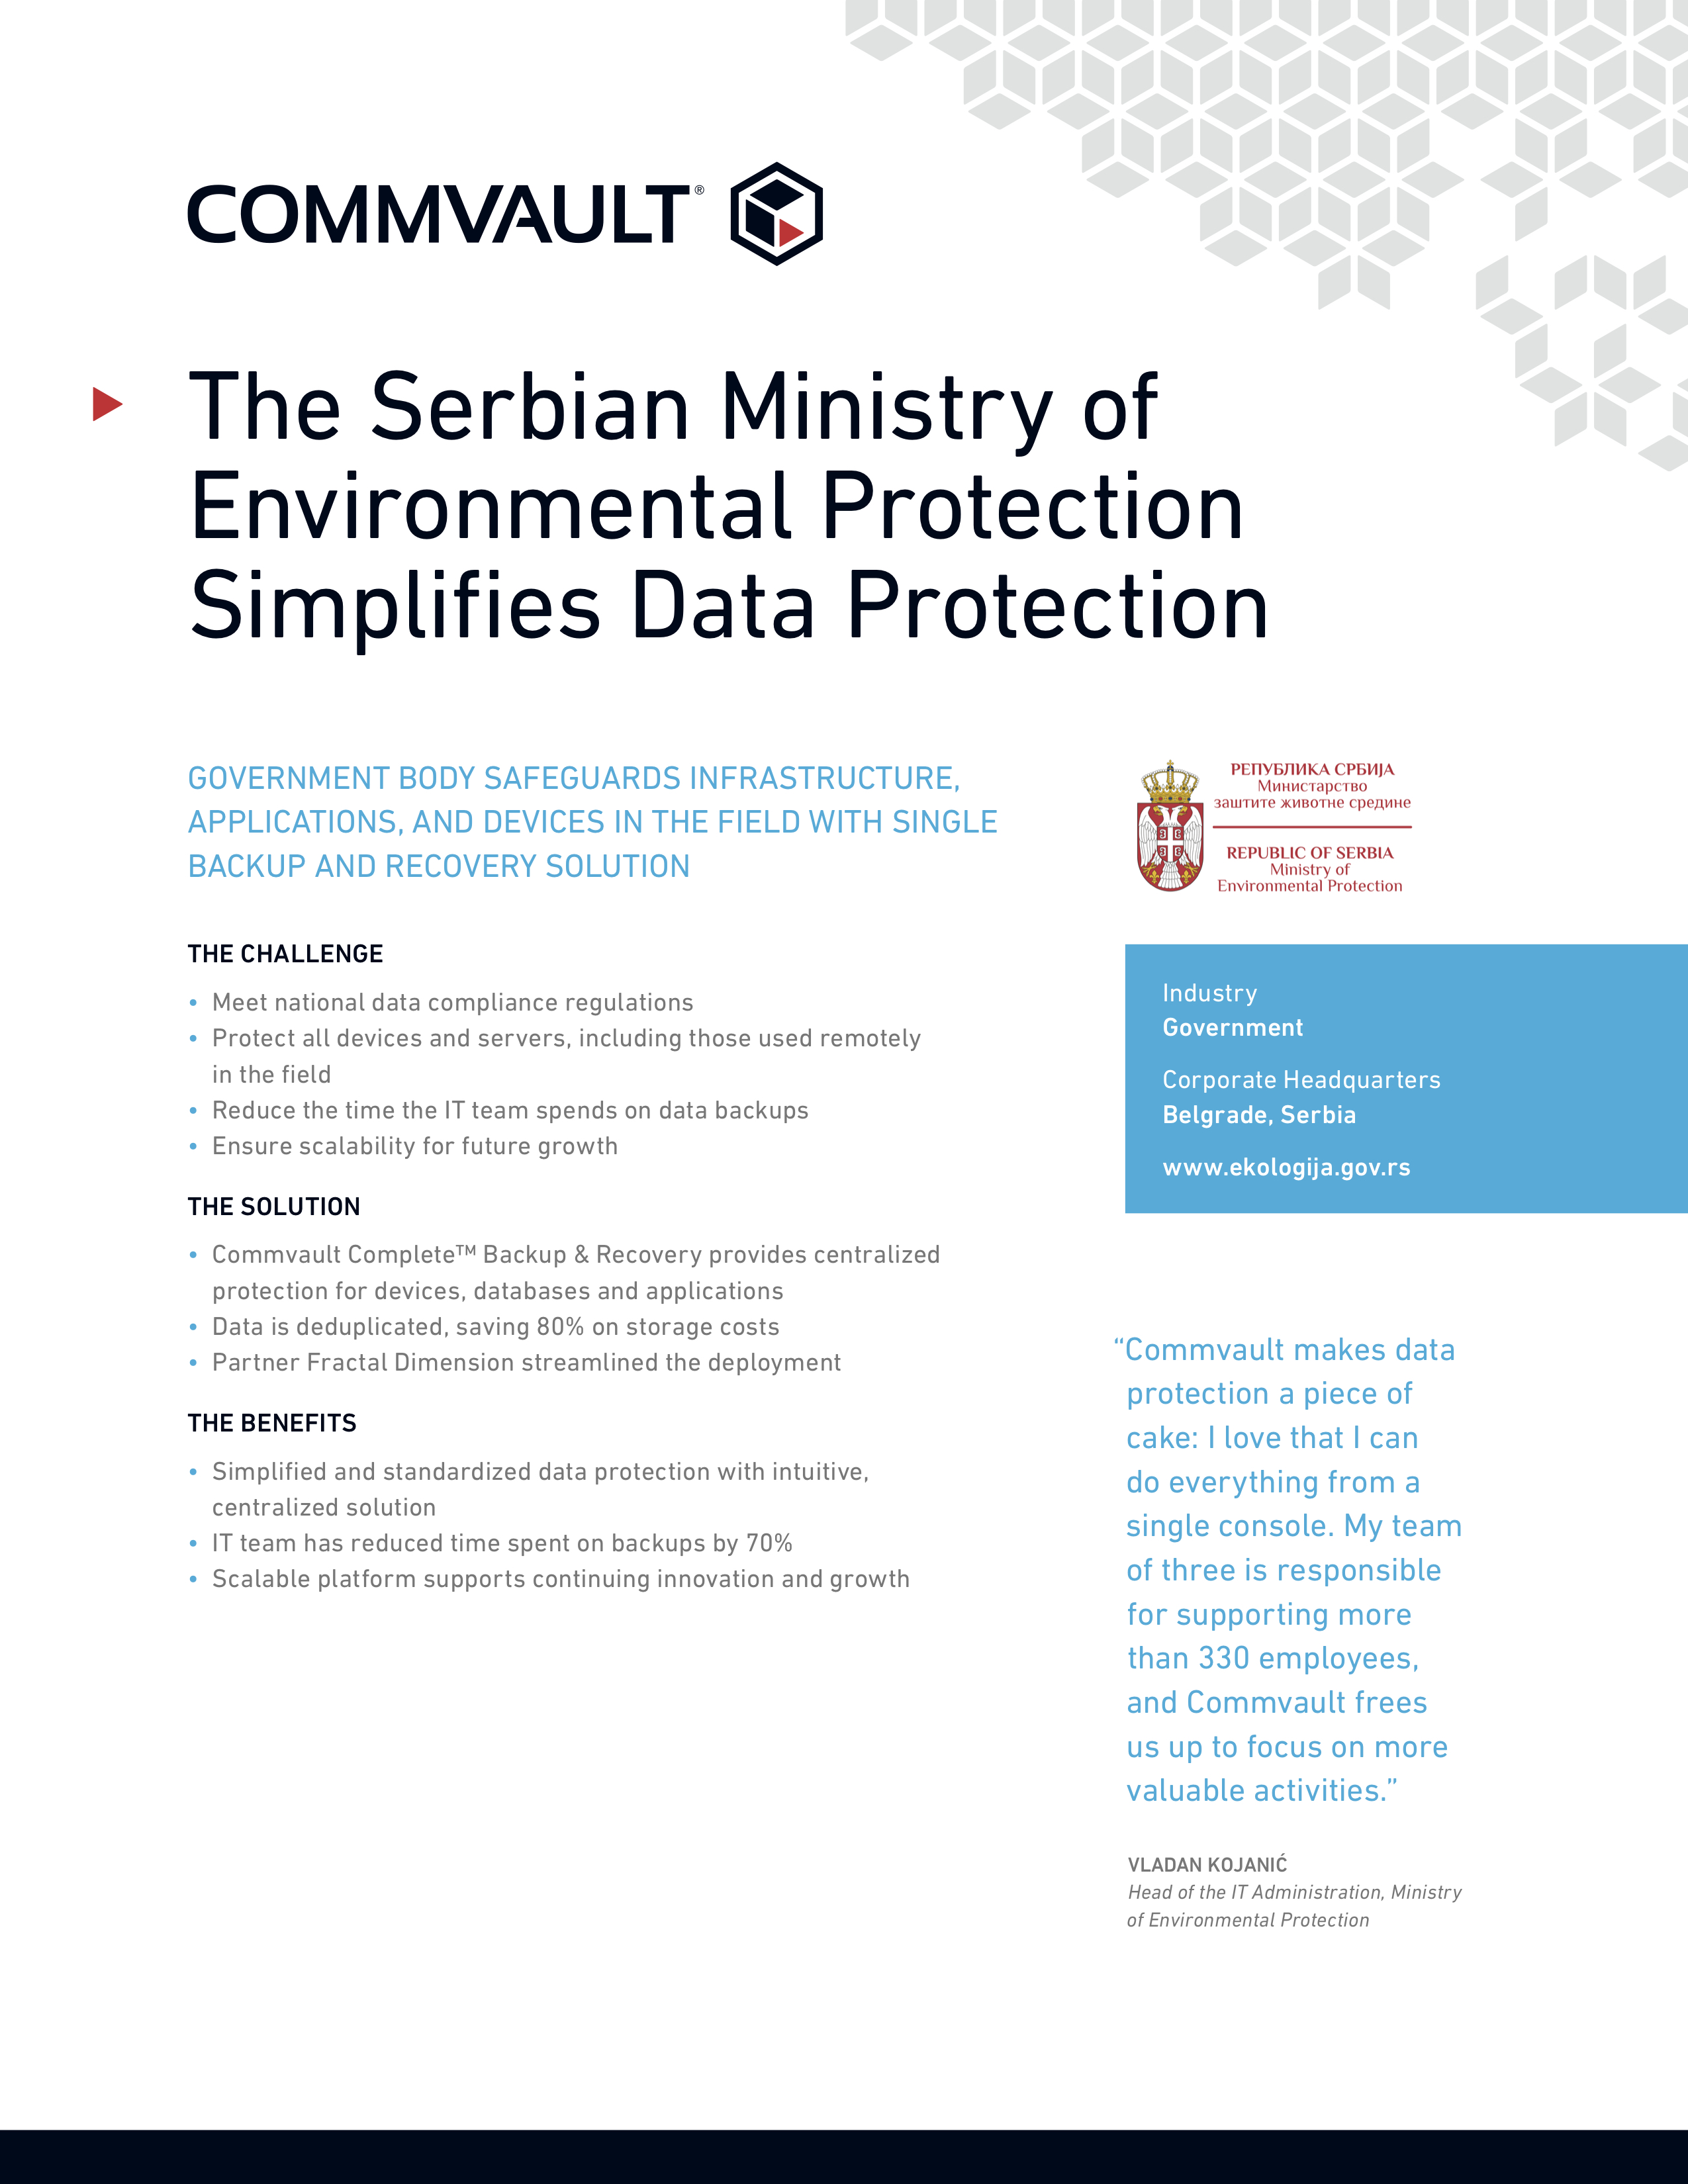 Case Study: The Serbian Ministry of Environmental Protection